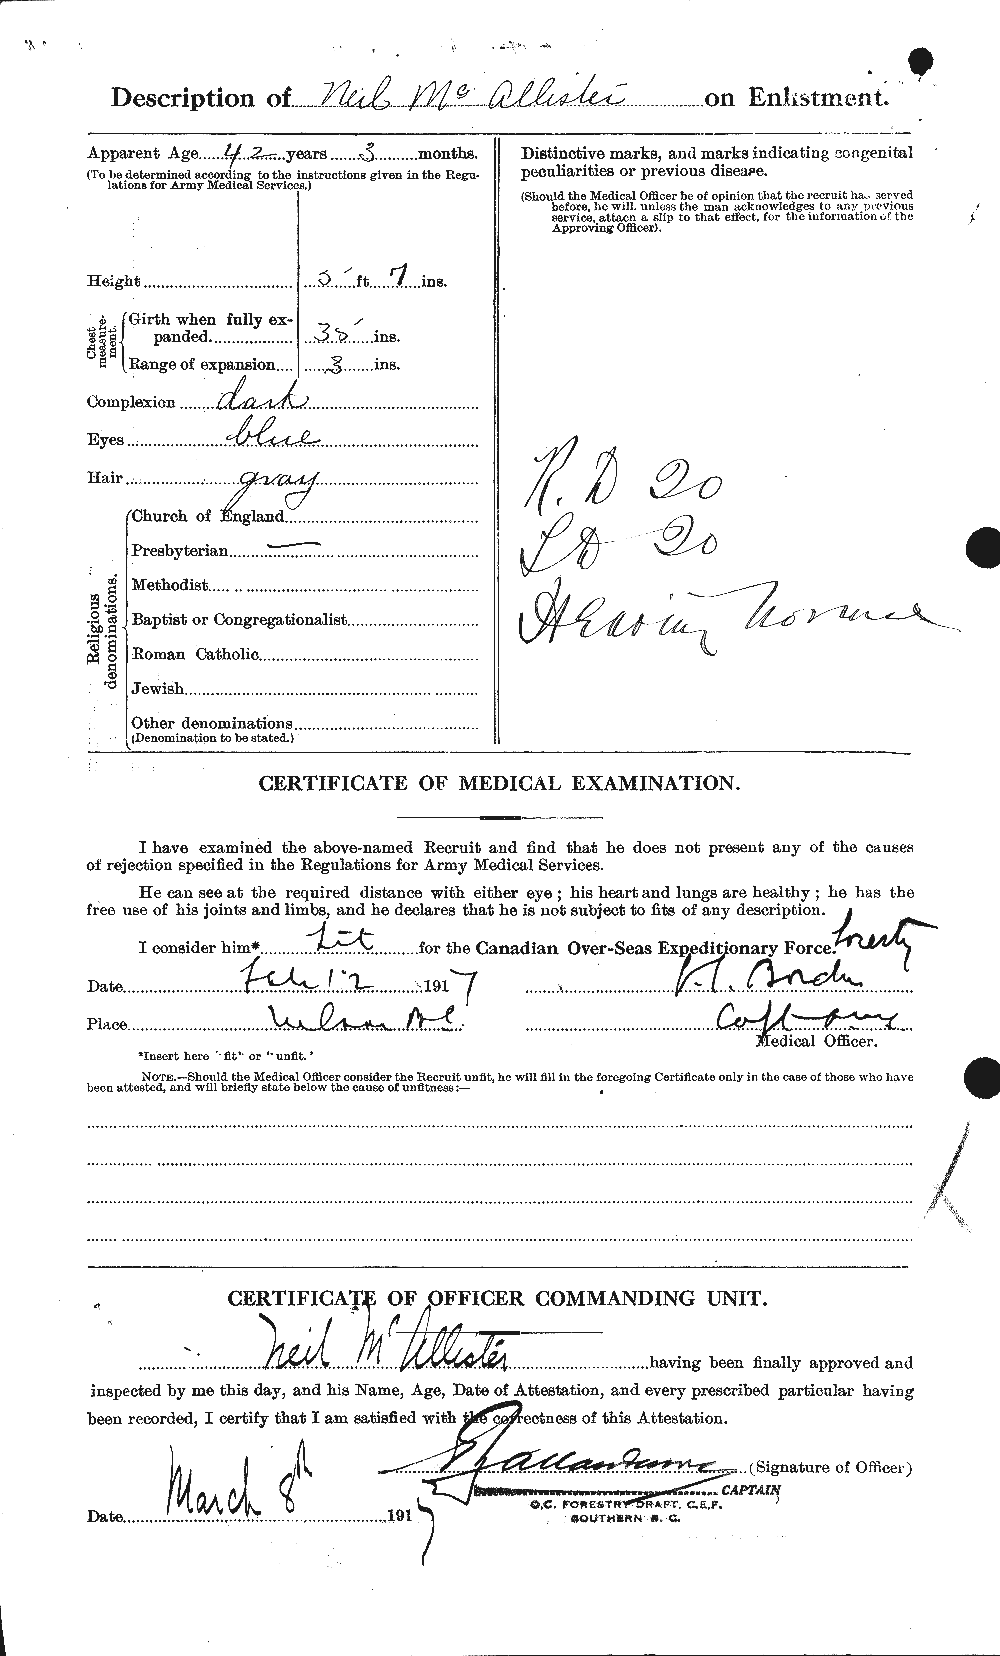 Personnel Records of the First World War - CEF 515976b